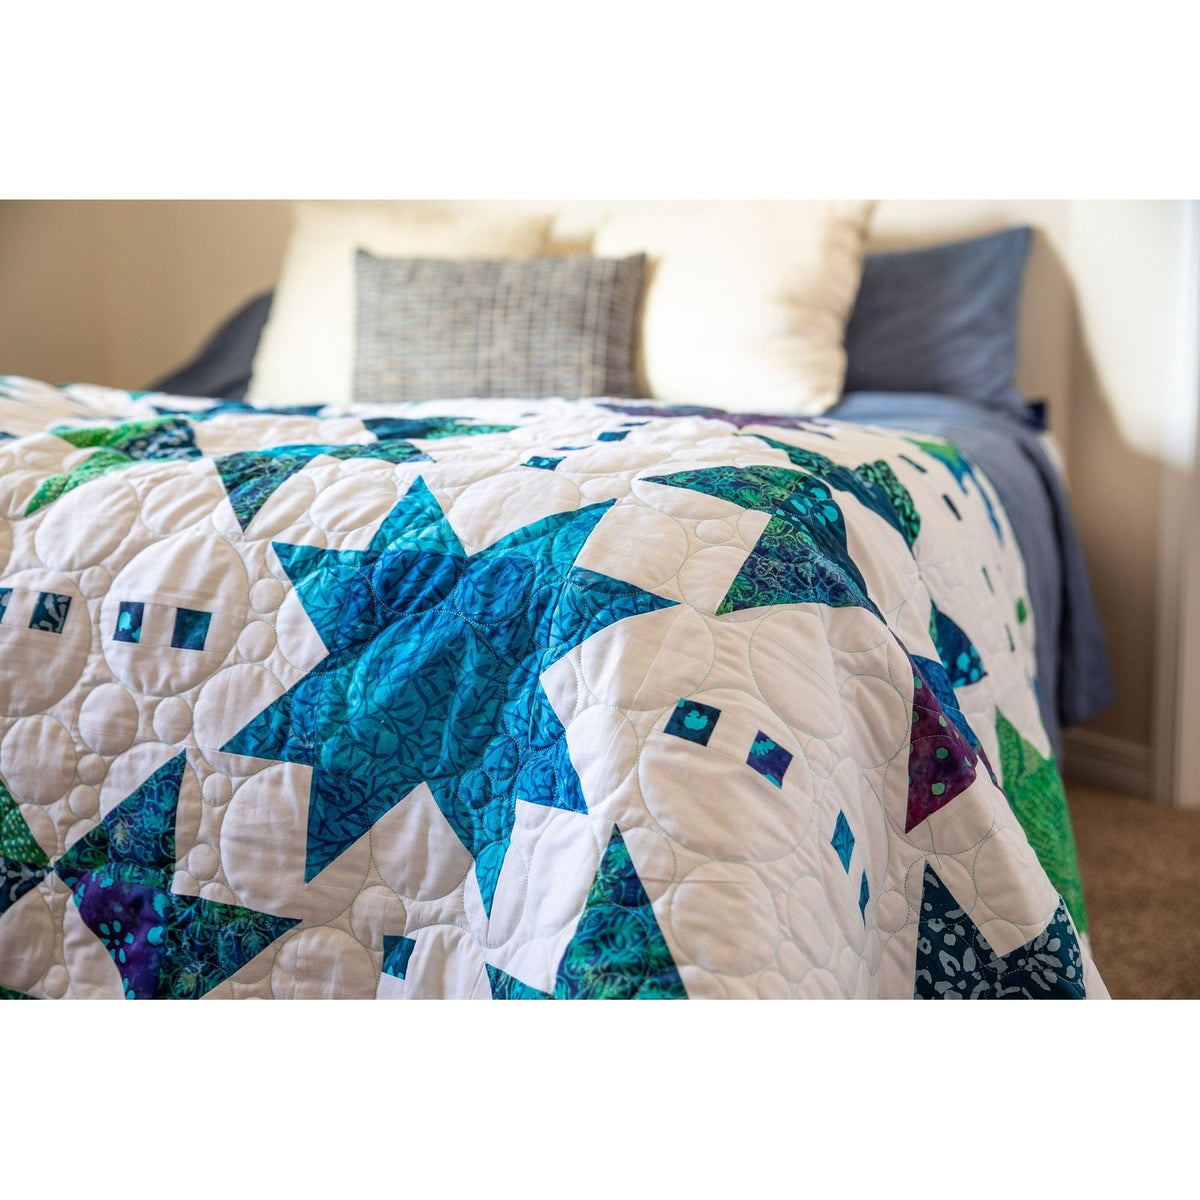 Celestial Azure Pre-Cut Quilt Kit: Complete Set with Pattern, Binding, & Backing - A Modernly Morgan Design